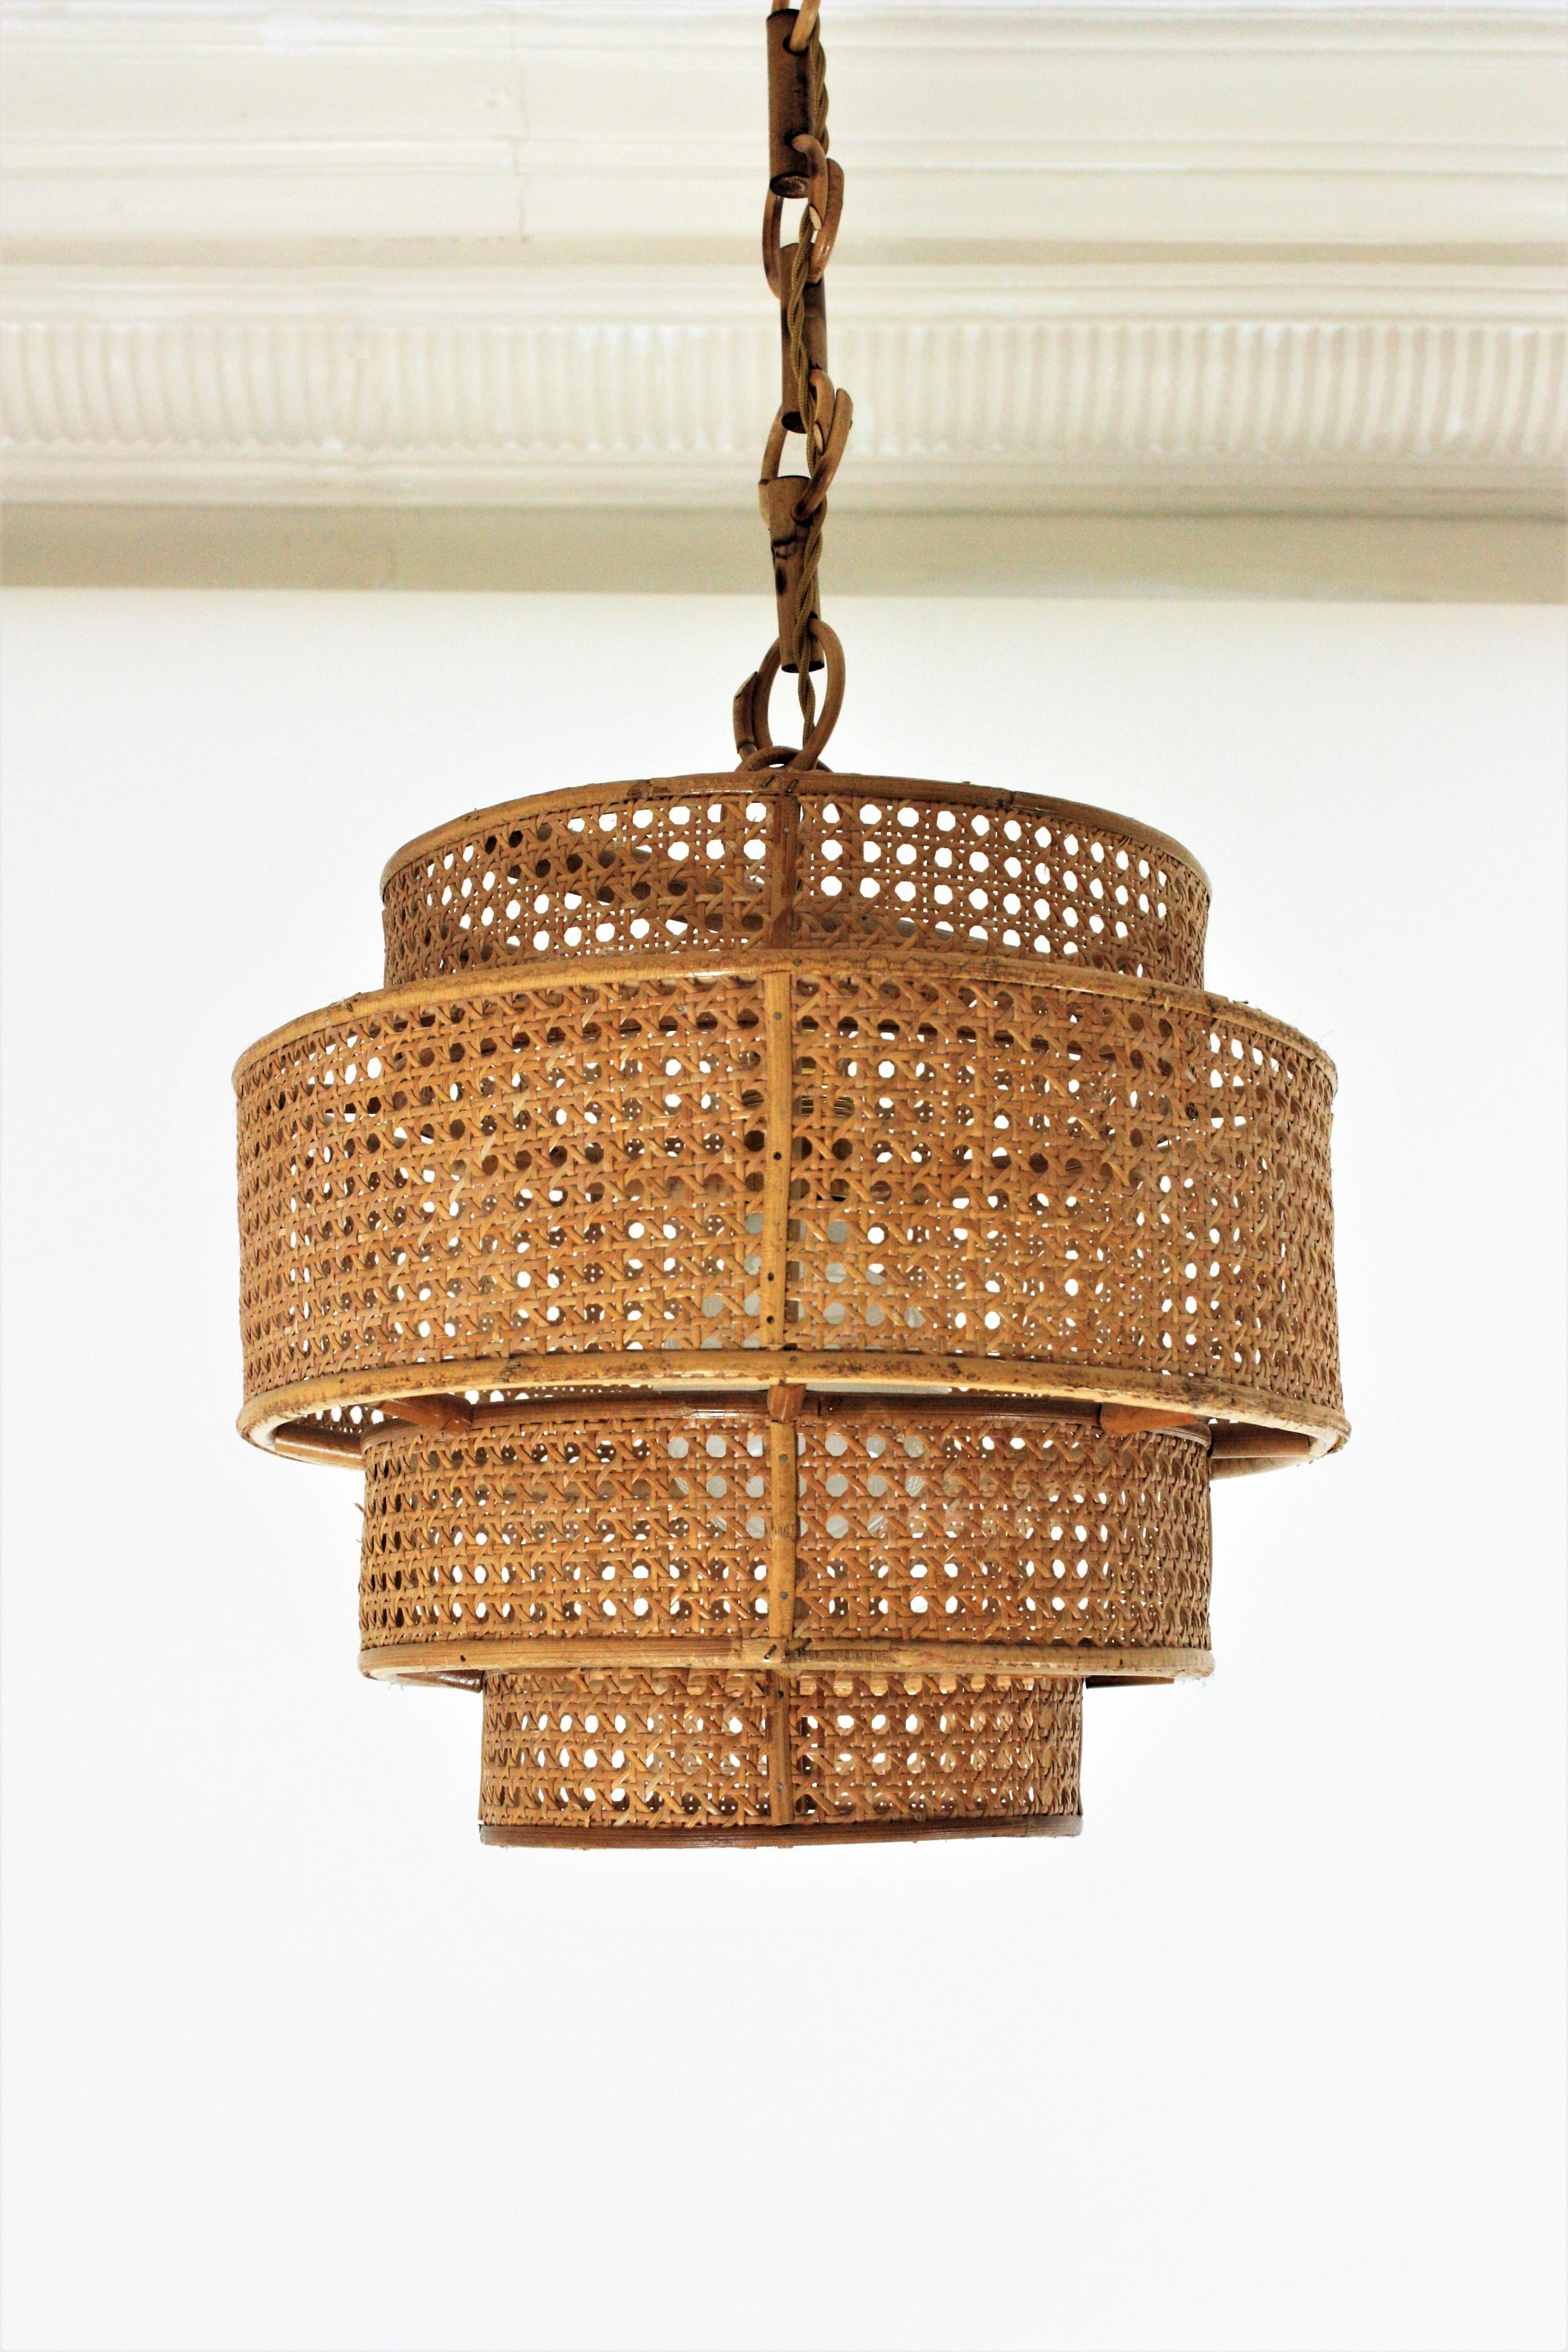  Rattan Wicker Weave Concentric Cylinder Pendant Hanging Light, 1960s For Sale 5